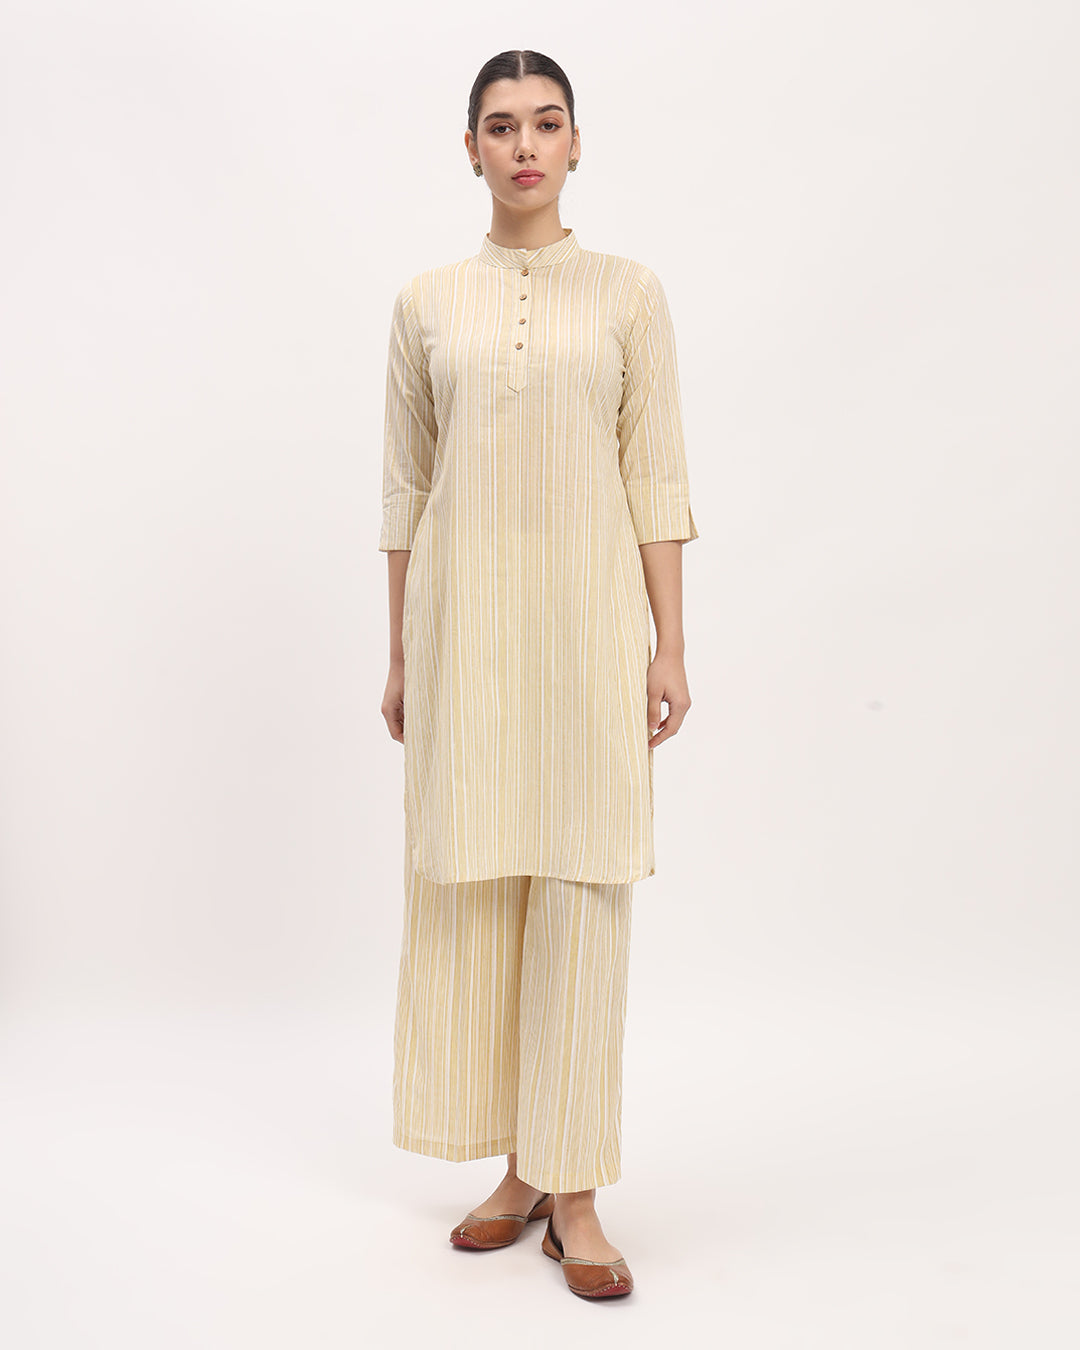 Combo: Maple Leaf & Yellow Chic Lines Band Collar Neck Printed Kurta (Without Bottoms)